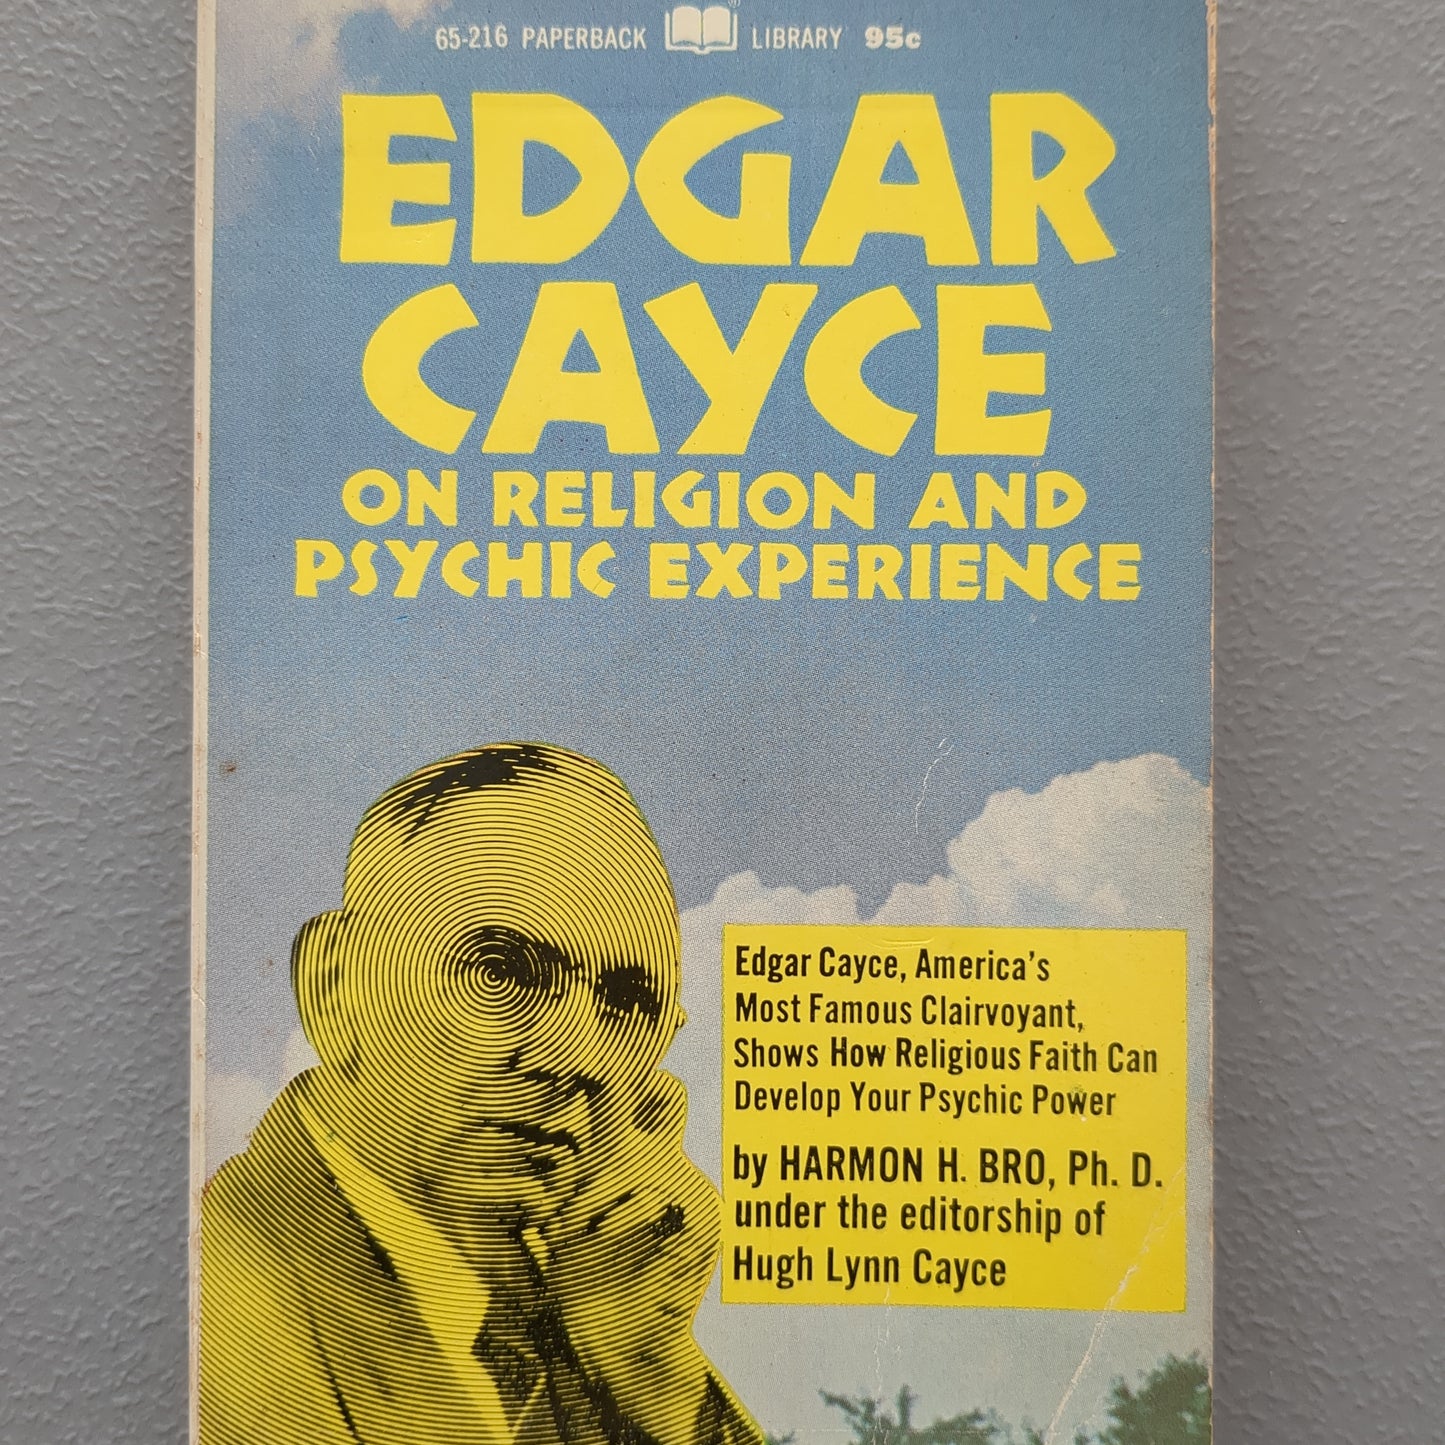 Edgar Cayce on religion and psychic experience